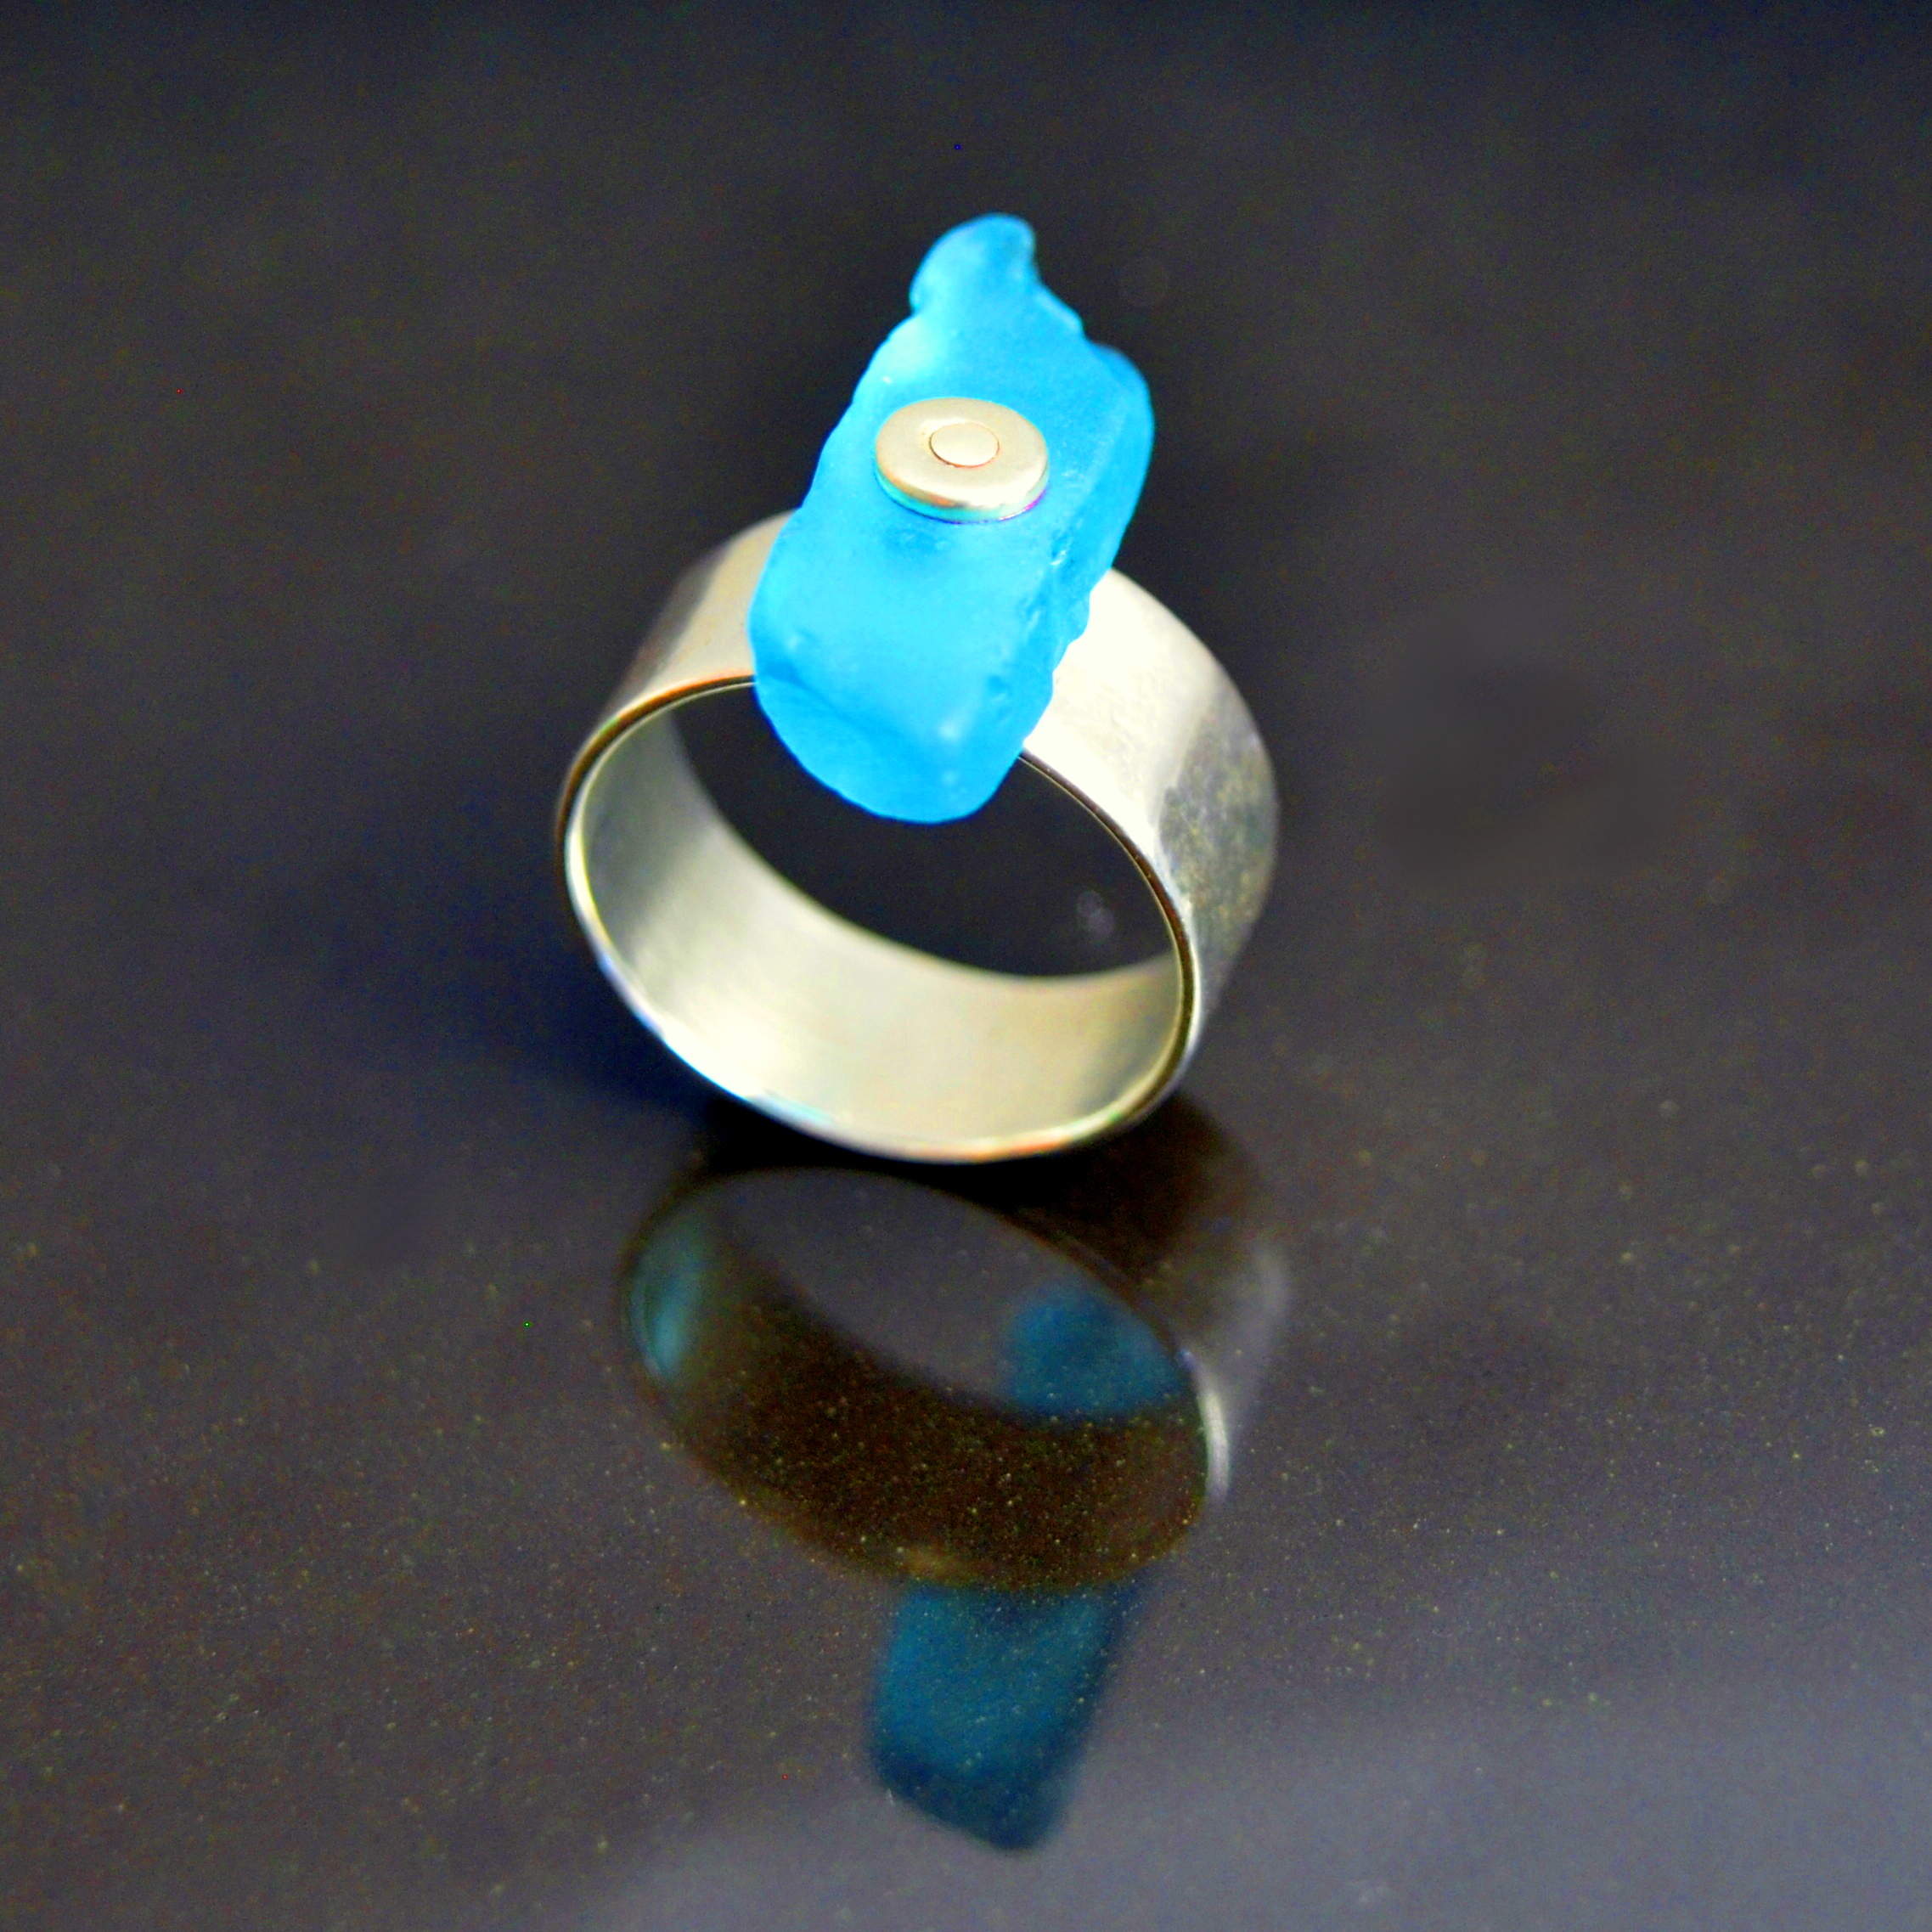 Sea Glass Riveted Silver Clay Ring by Tracey Spurgin of Craftworx Jewellery Workshops